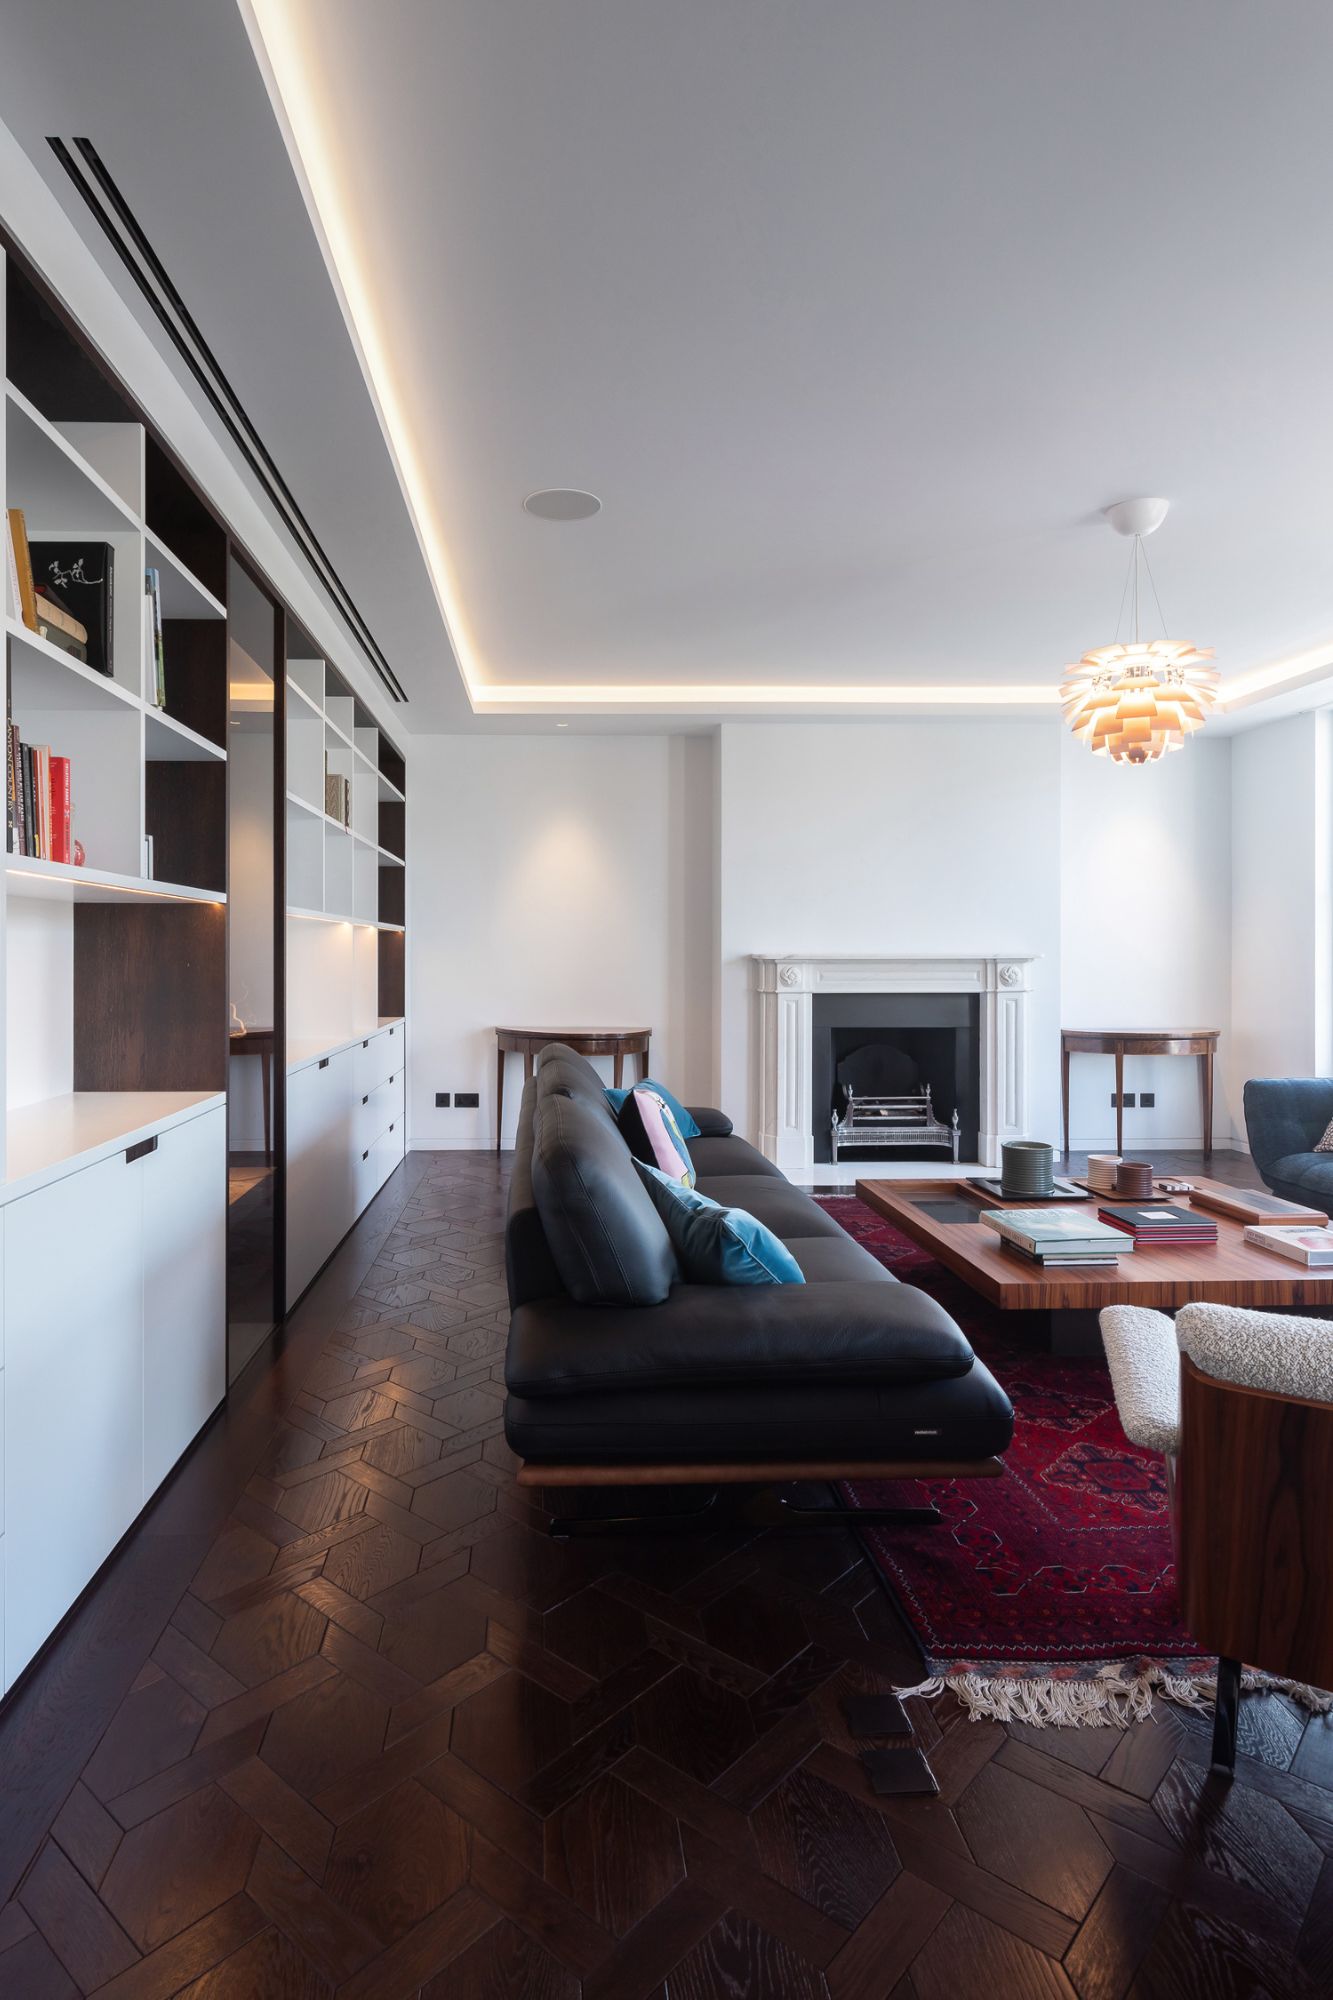 Calibre Climate, Calibre Climate Delivers an Integrated AC Design into a Luxury Lateral Apartment